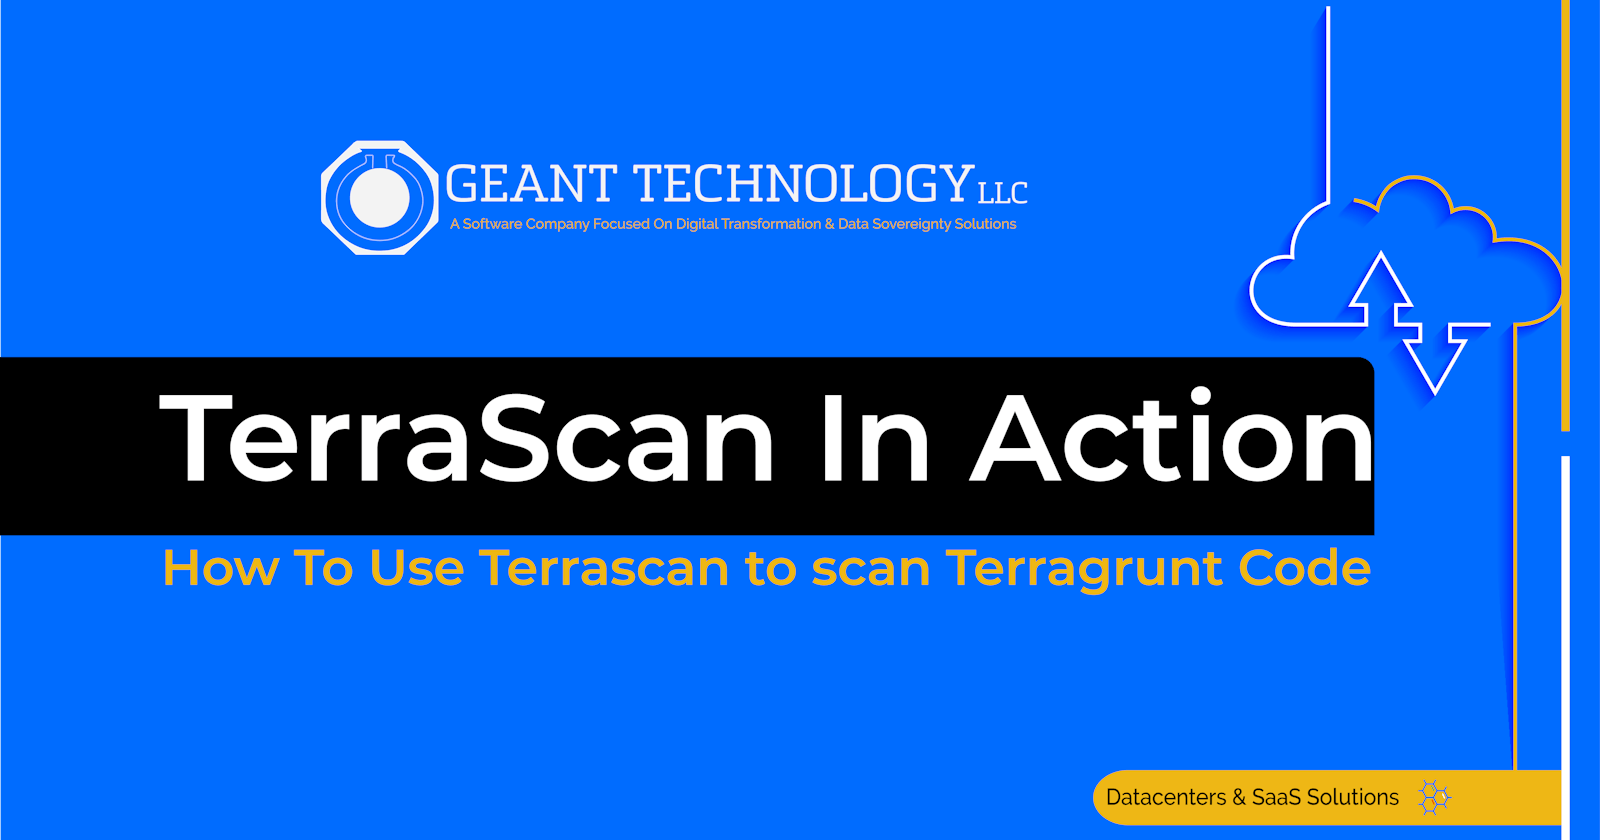 How To use Terrascan to scan Terragrunt Code